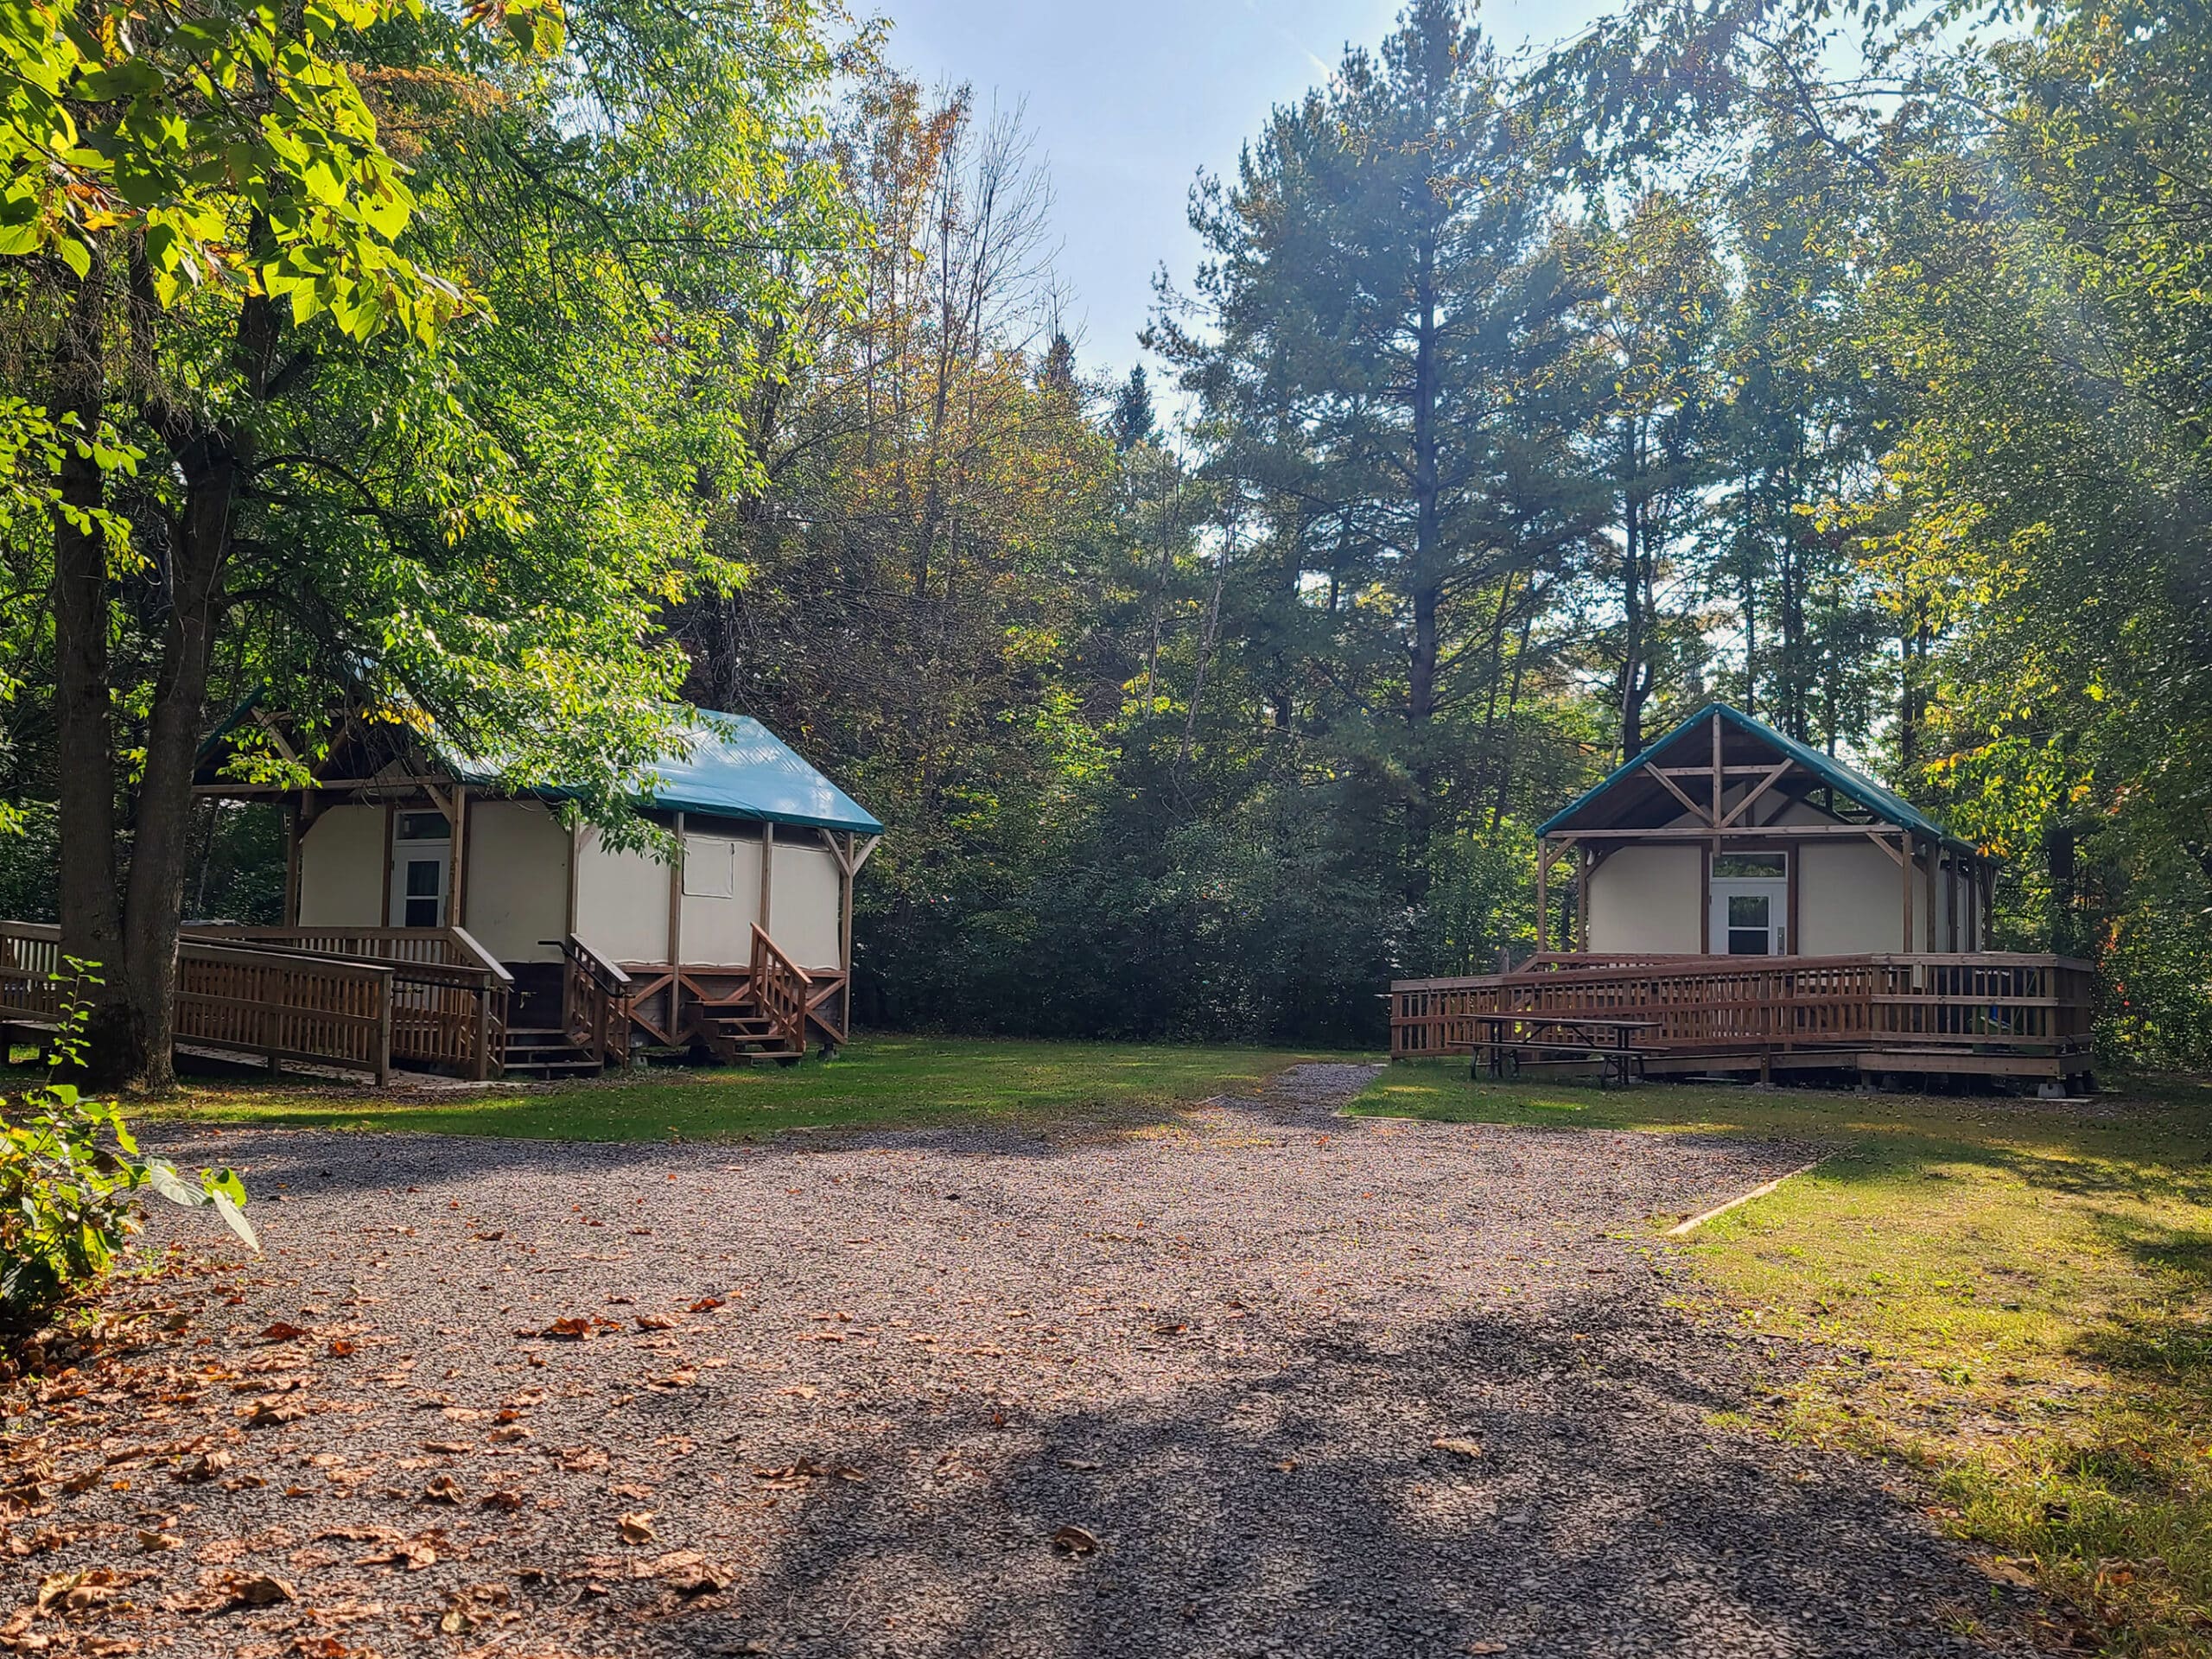 2 soft sided cabins with woods in the background.